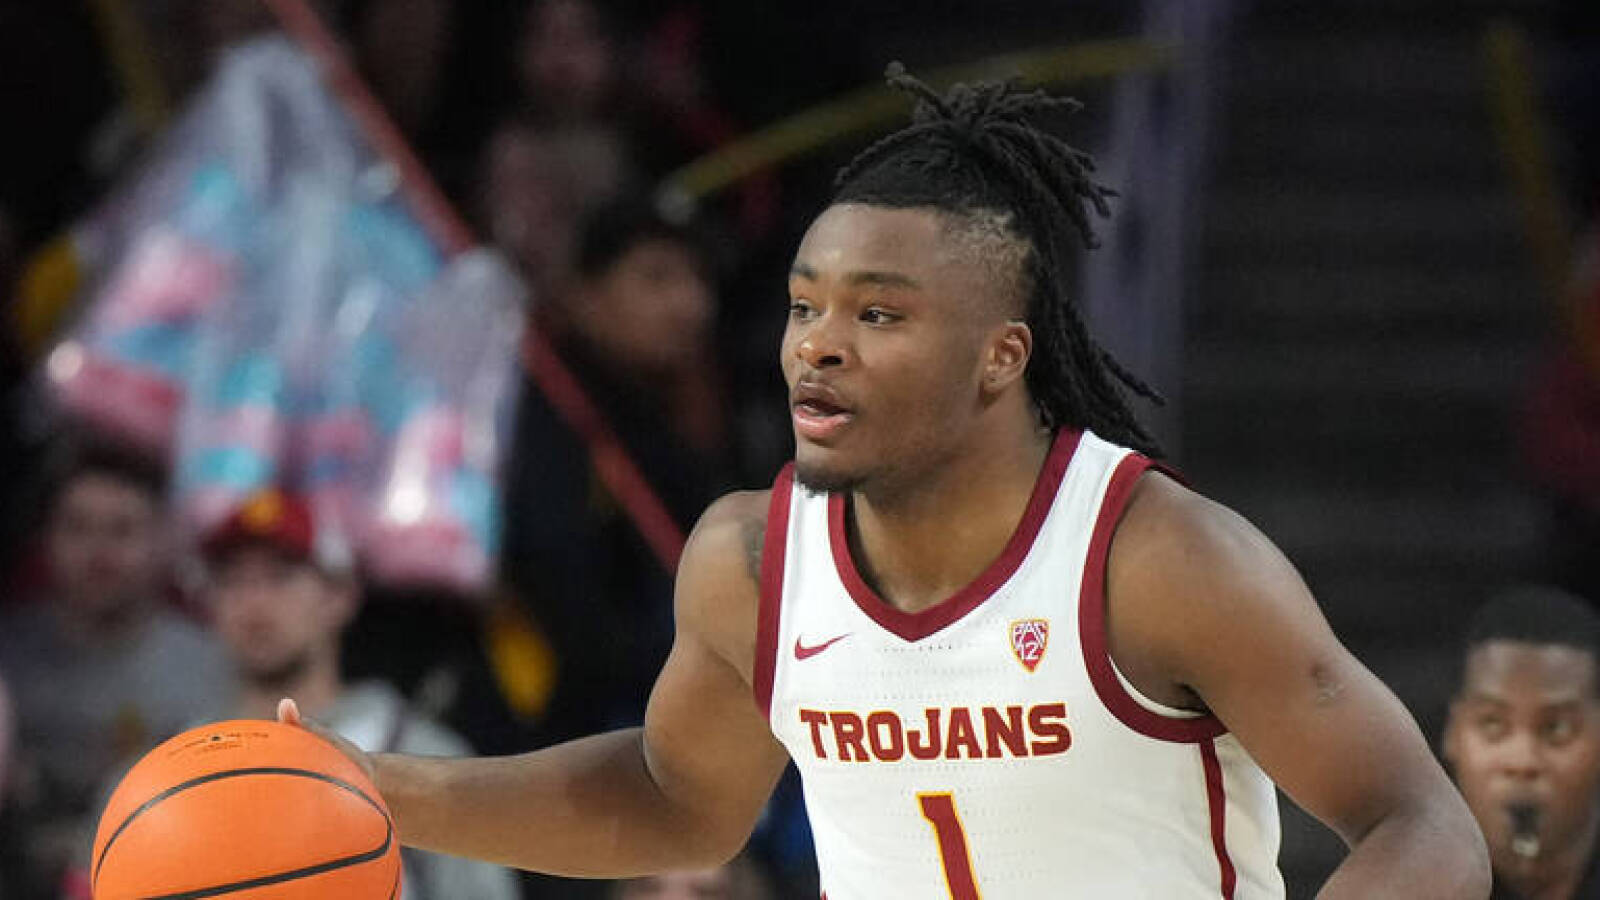 NBA Draft report for USC guard Isaiah Collier